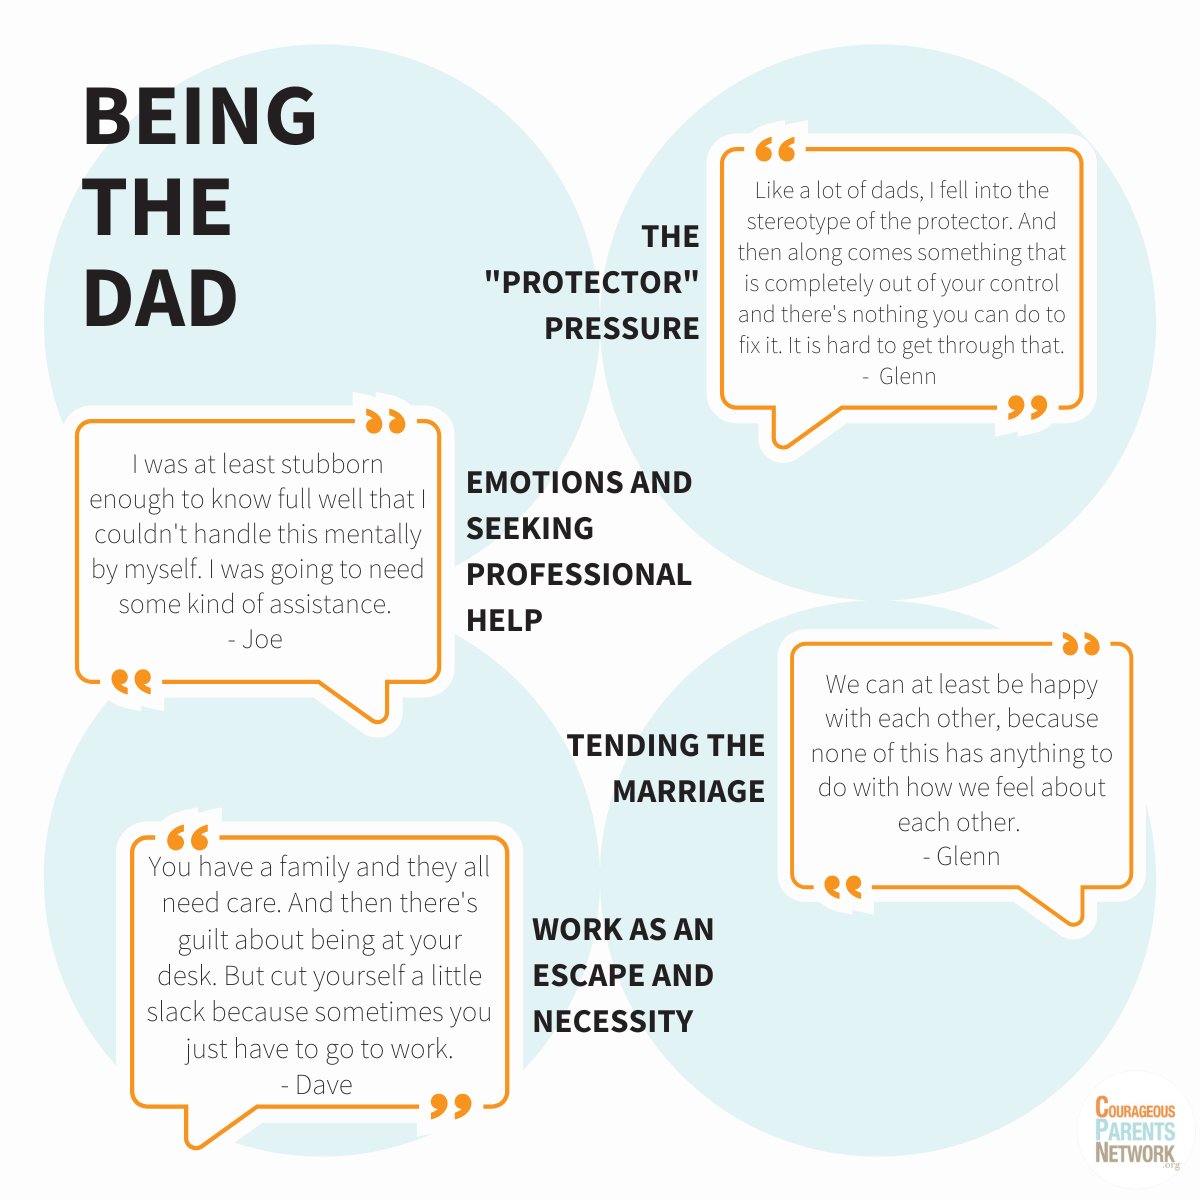 As we prepare for Father’s Day, we acknowledge the special role that fathers of children with serious conditions play. Hear from #dads speaking about their experiences as caregivers. Understand their perspective & find ways you may be able to support them. hubs.li/Q01TGrd30